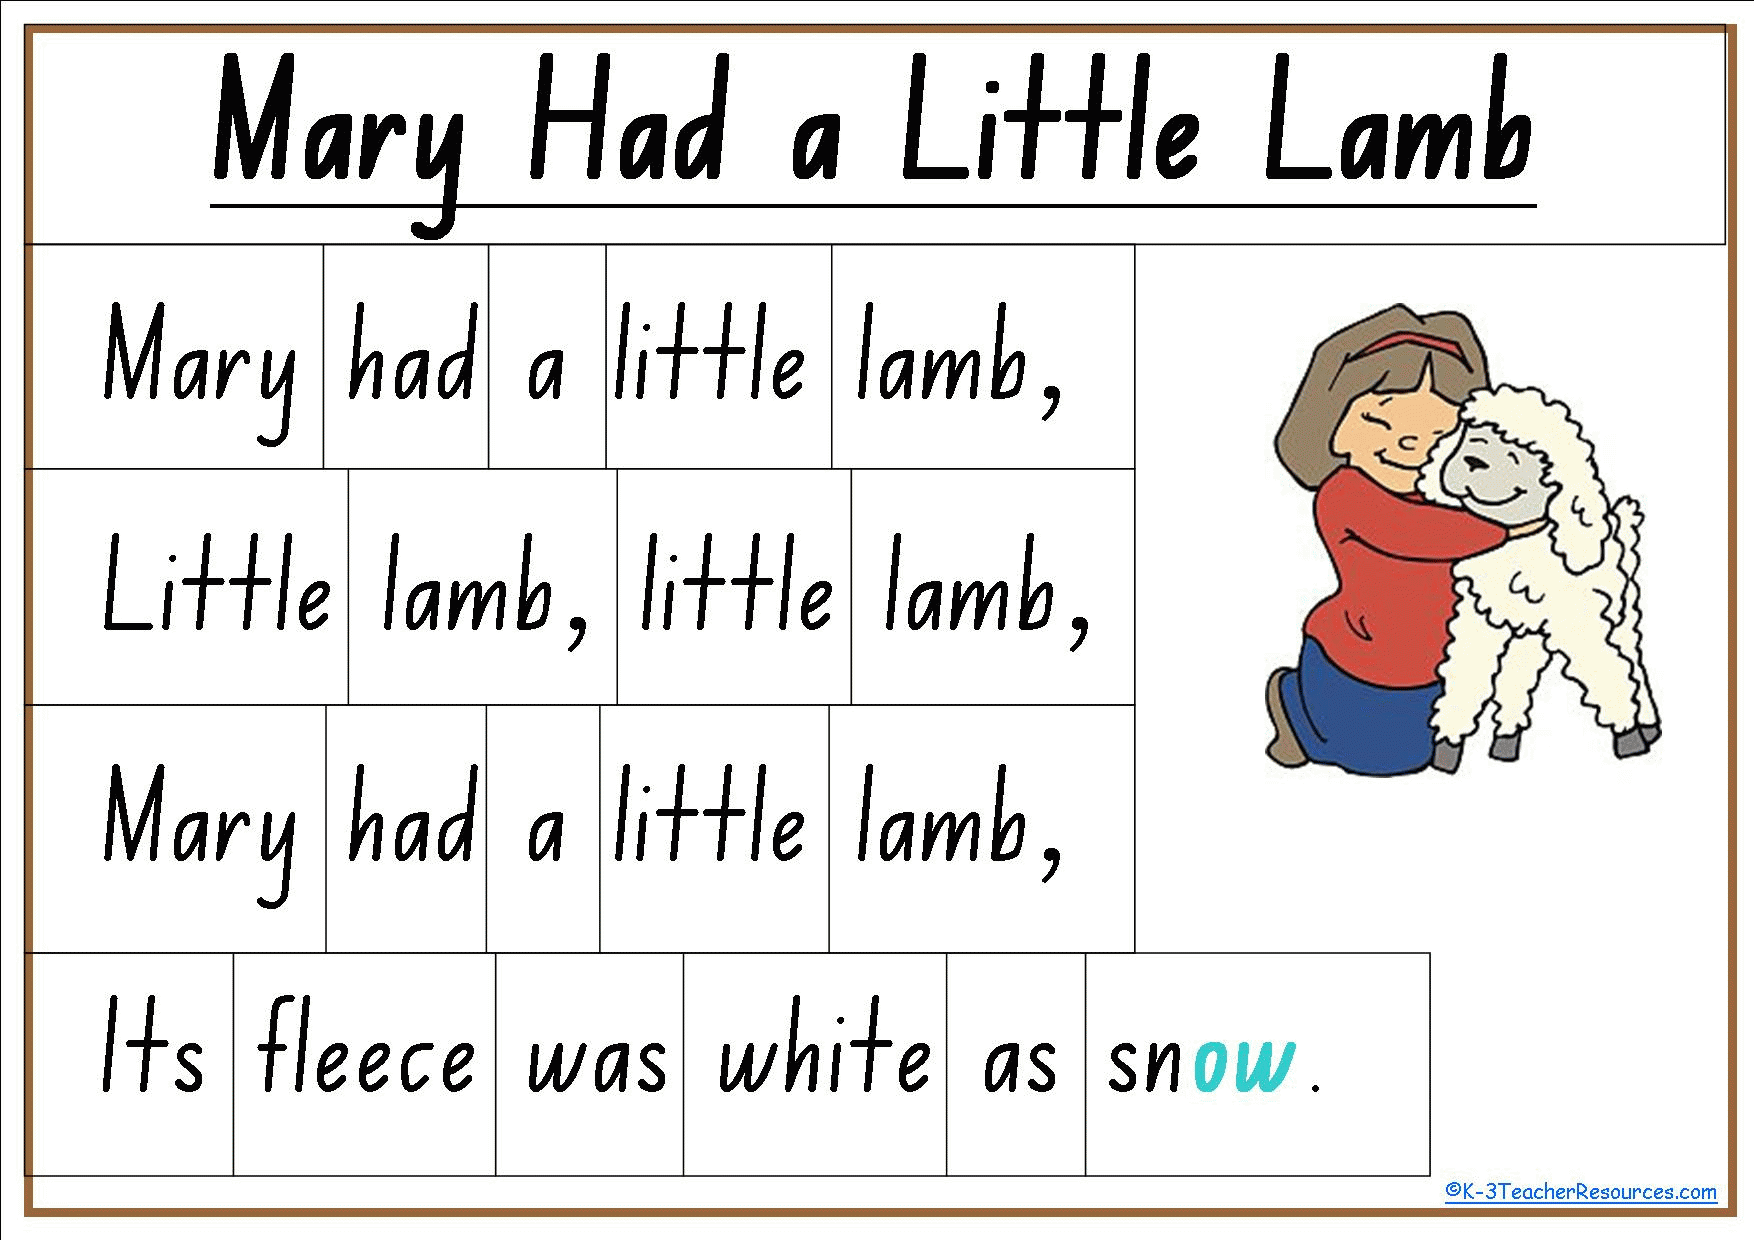 free-mary-had-a-little-lamb-coloring-page-download-free-mary-had-a